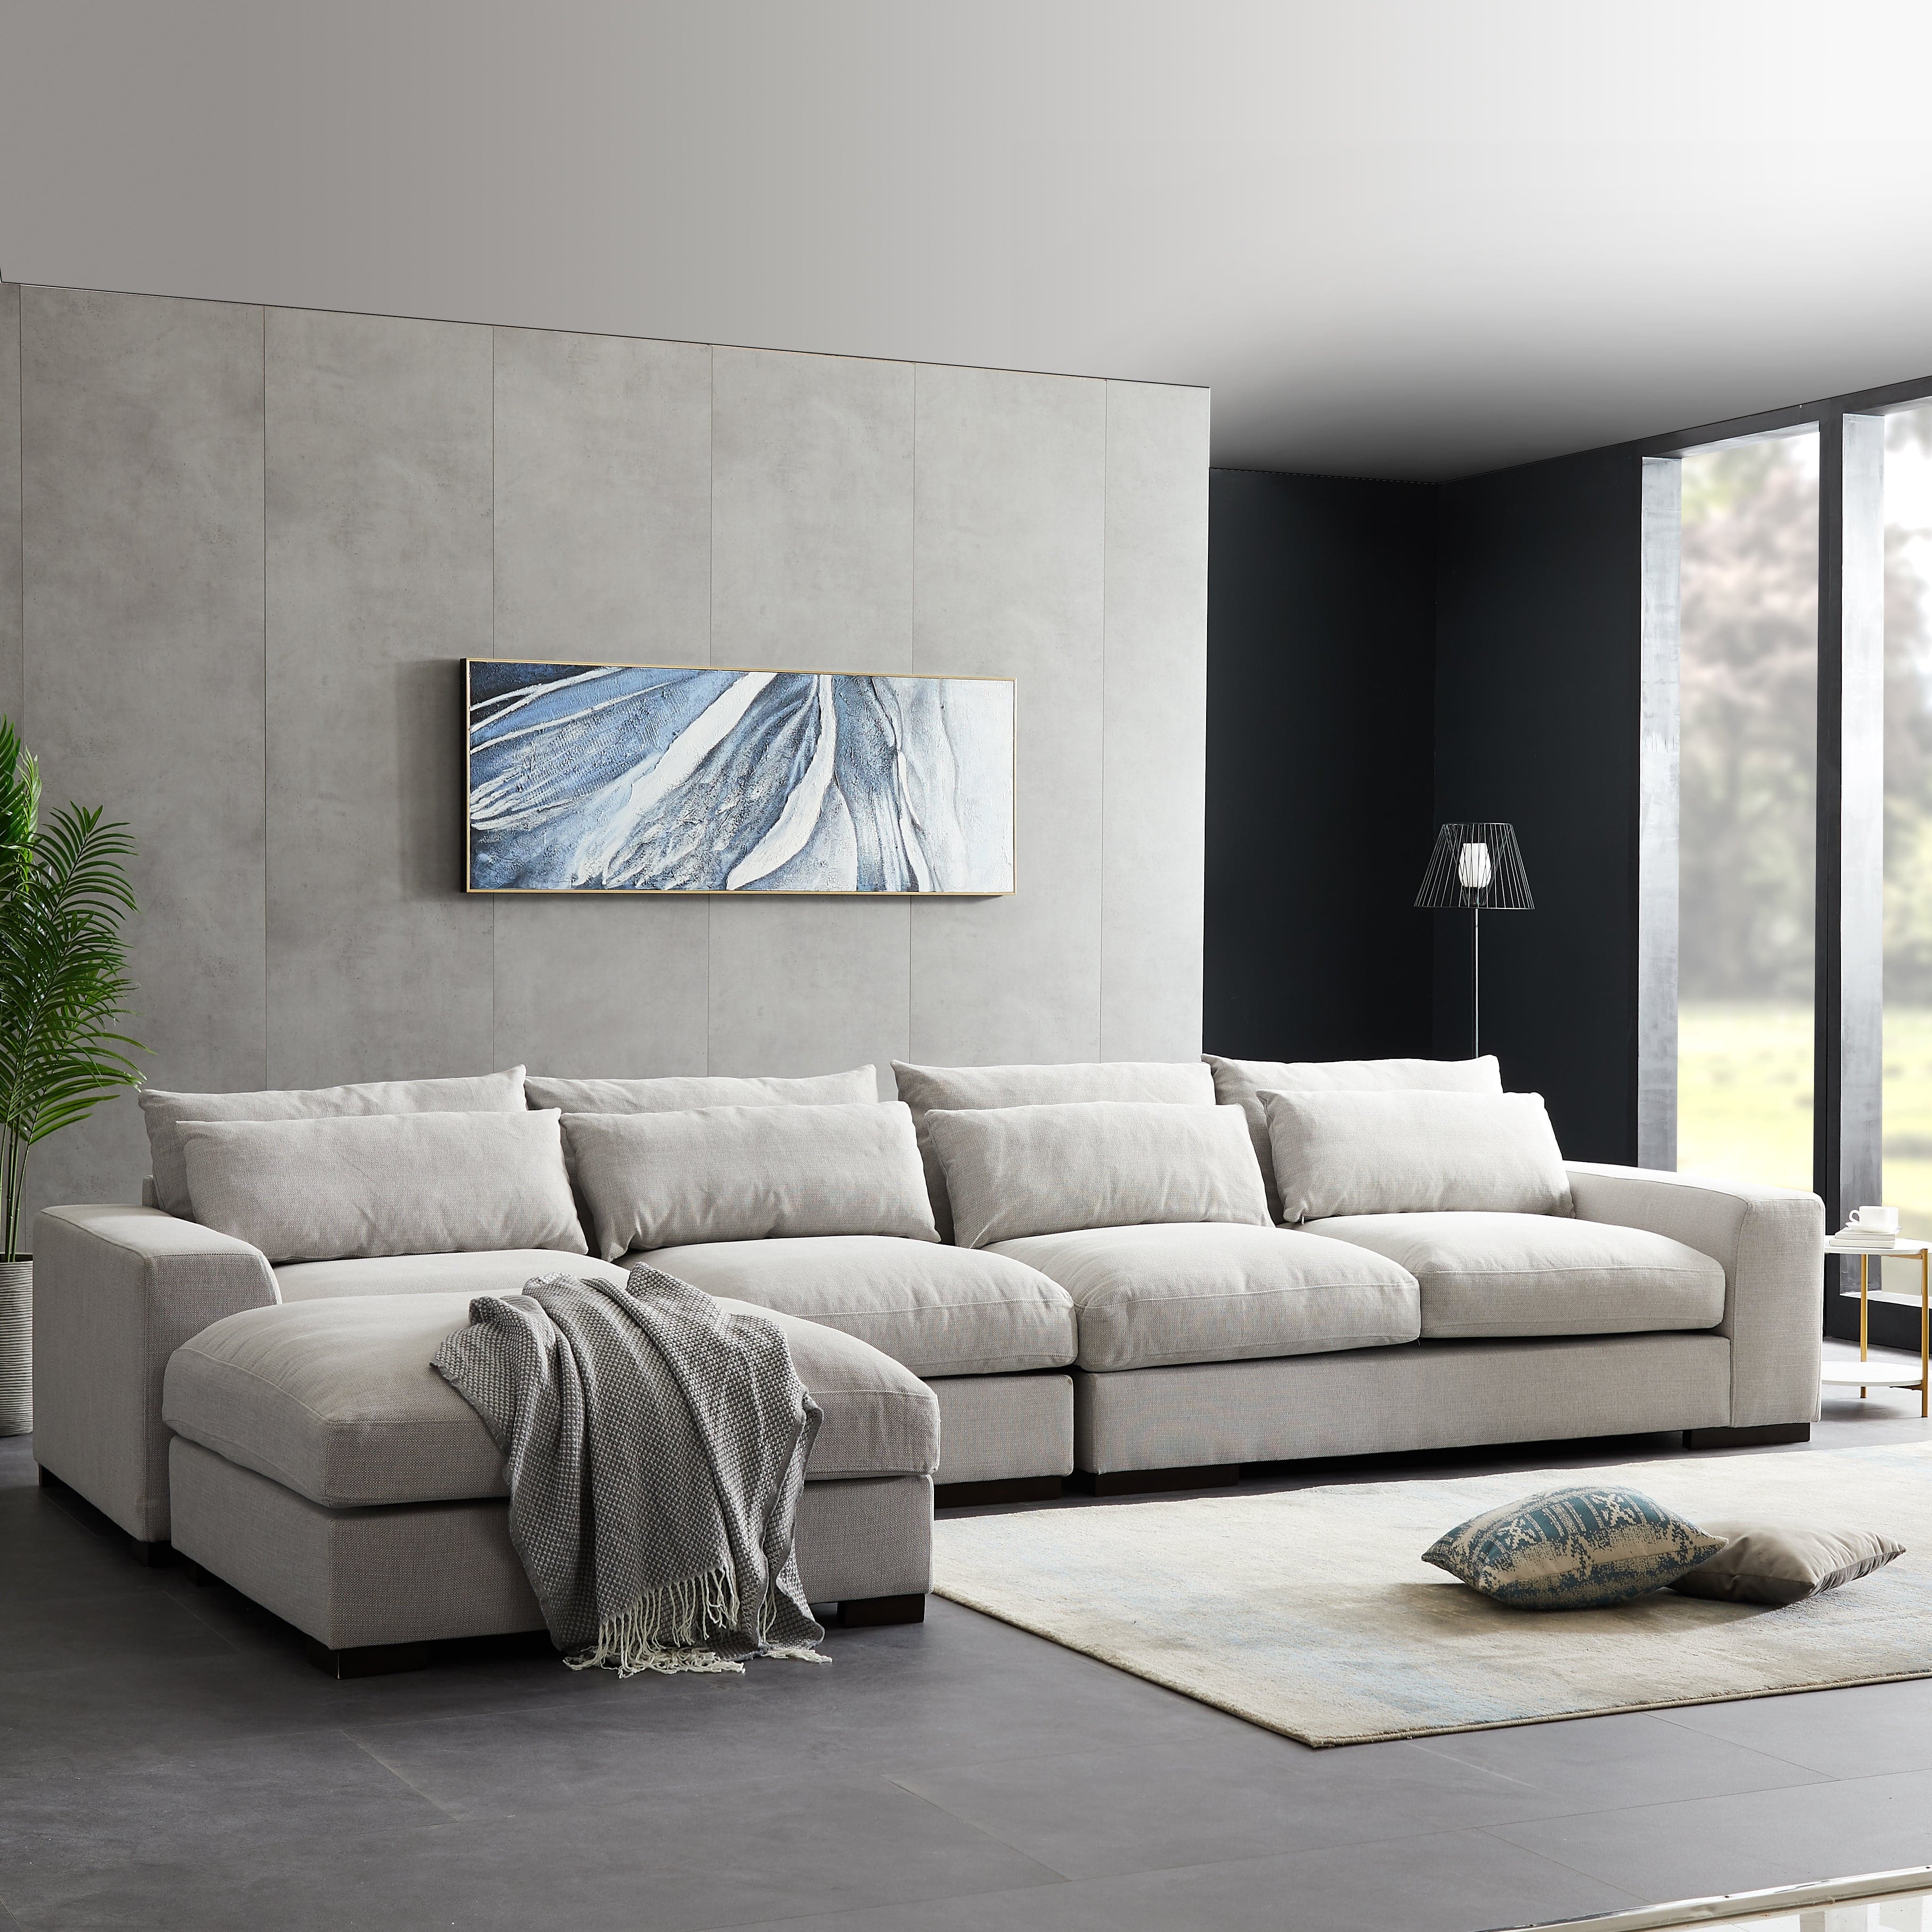 - TFC&H Co. SOFA AND COMFORTABLE SECTIONAL SOFA - LIGHT GREY- Ships from The US - sectional at TFC&H Co.